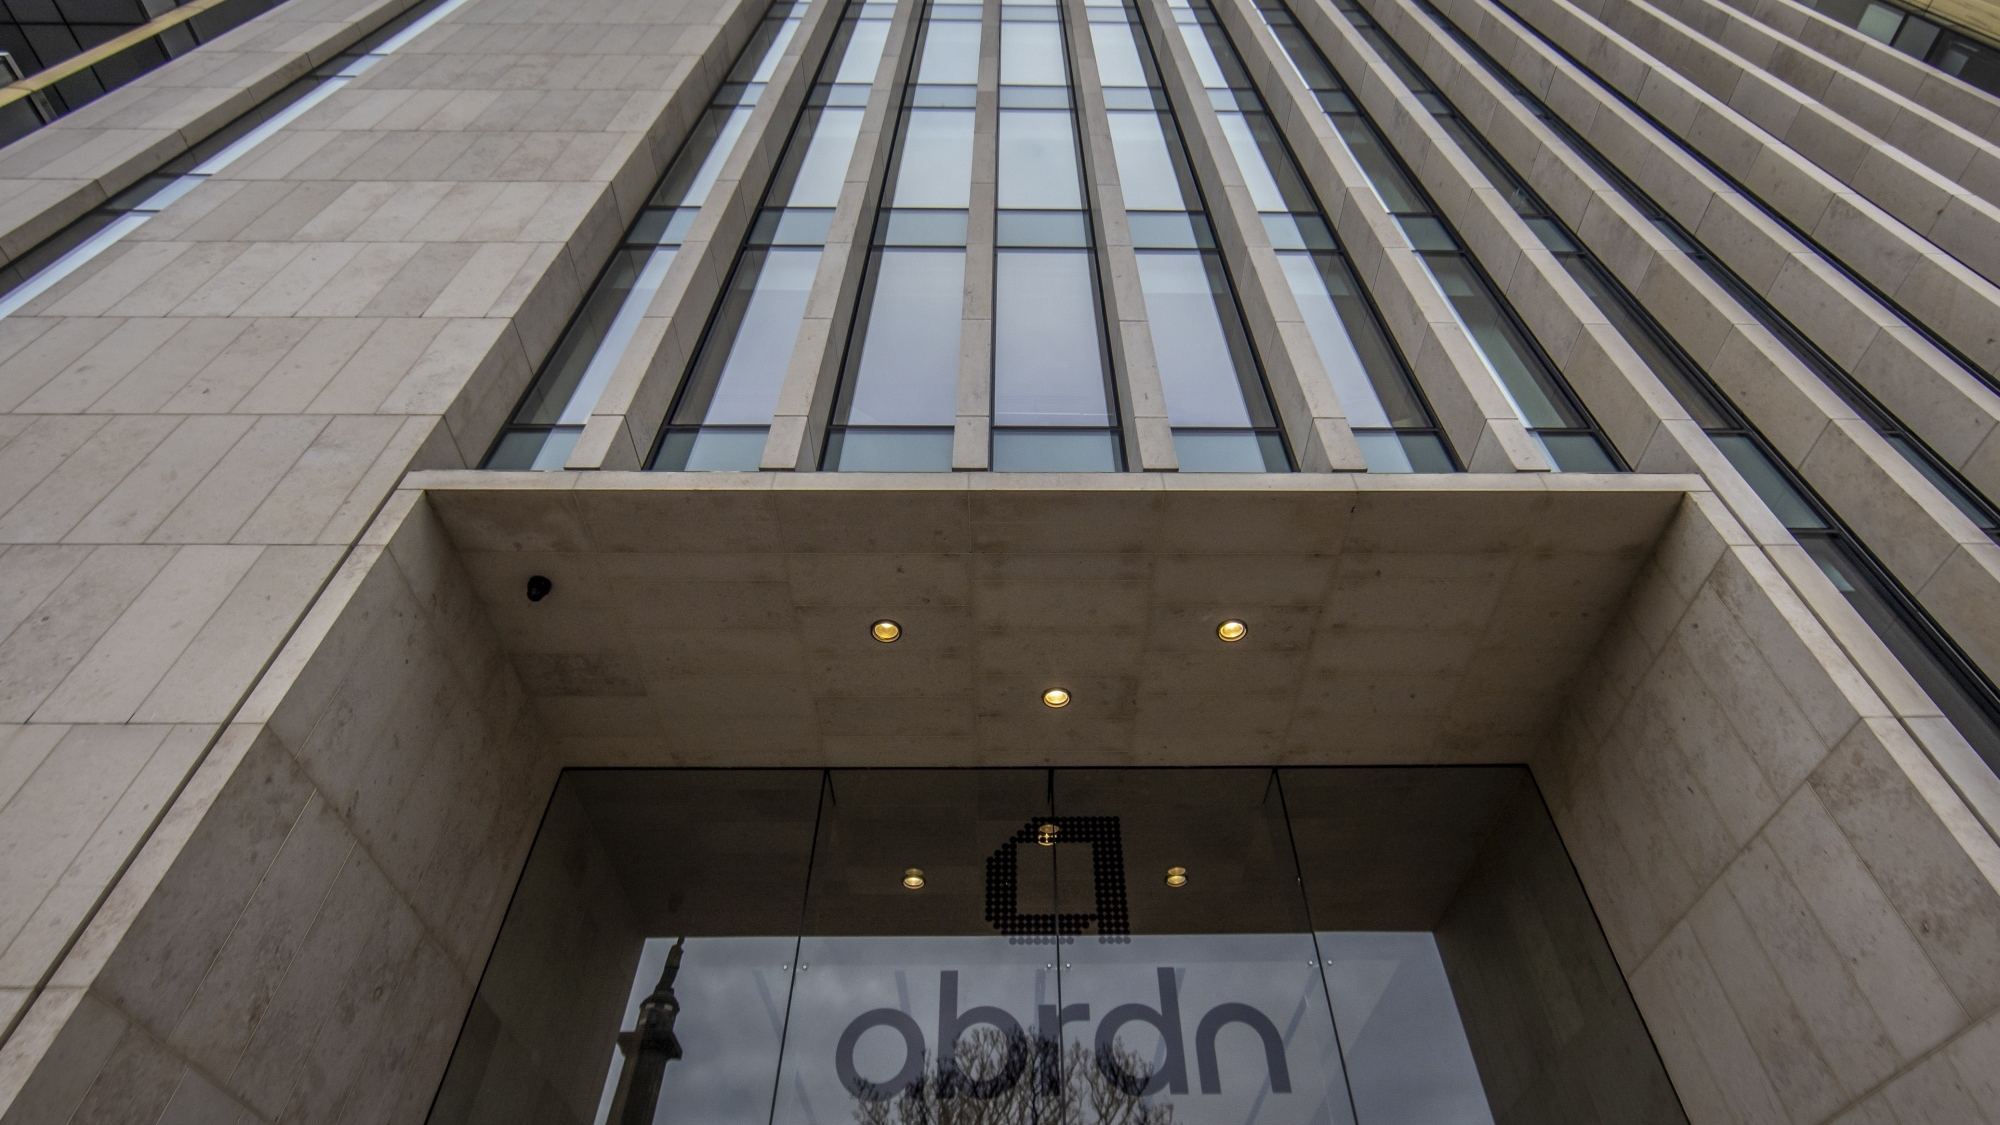 Abrdn set to axe hundreds of jobs in a GBP 150 million restructuring move. 

Image Source: Bloomberg 